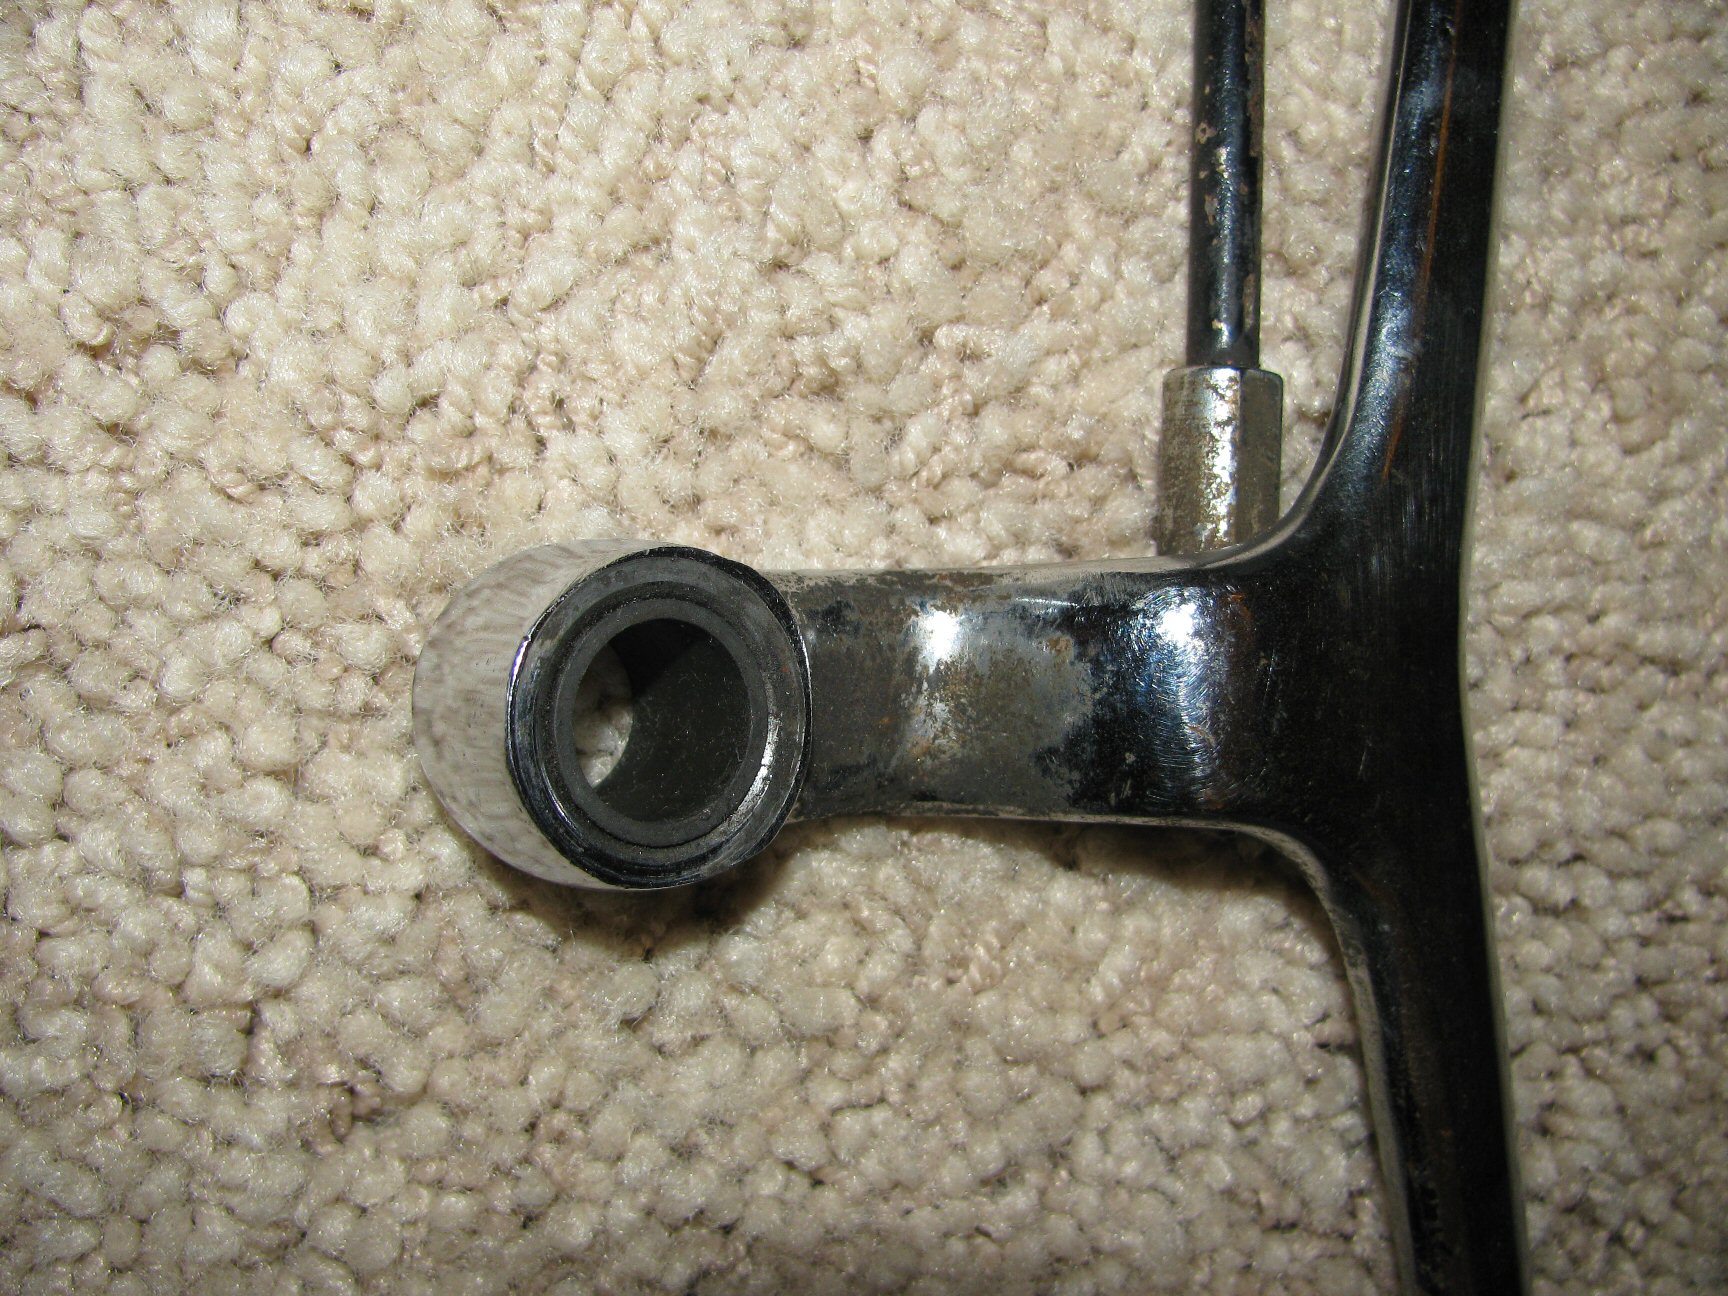 Outside close up of the Tonti frame shift lever.